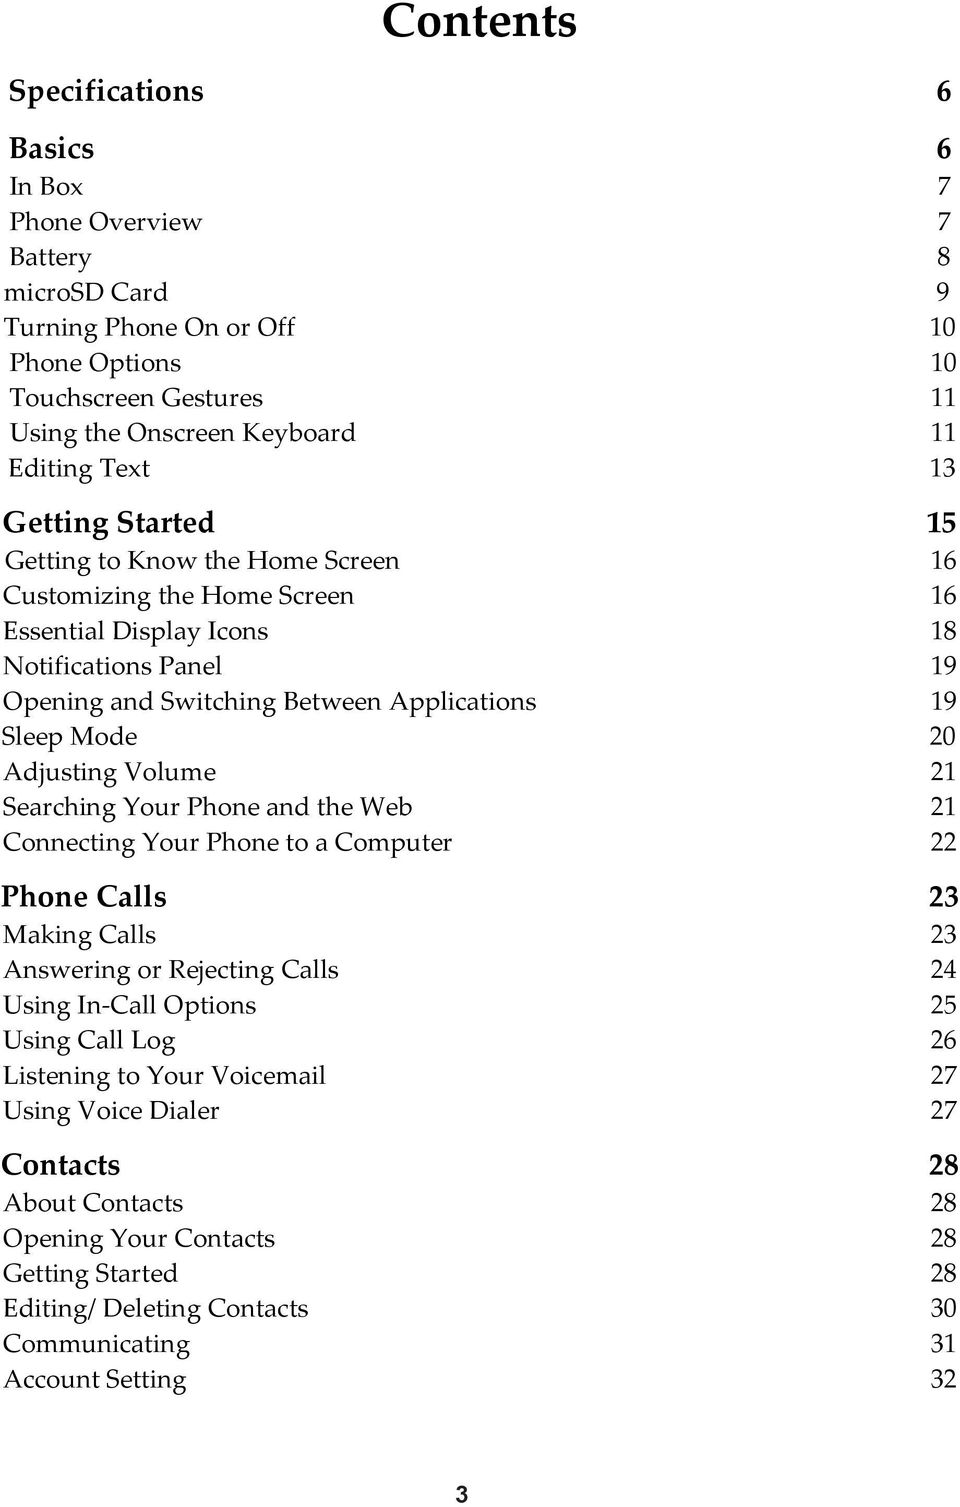 Adjusting Volume 21 Searching Your Phone and the Web 21 Connecting Your Phone to a Computer 22 Phone Calls 23 Making Calls 23 Answering or Rejecting Calls 24 Using In-Call Options 25 Using Call Log